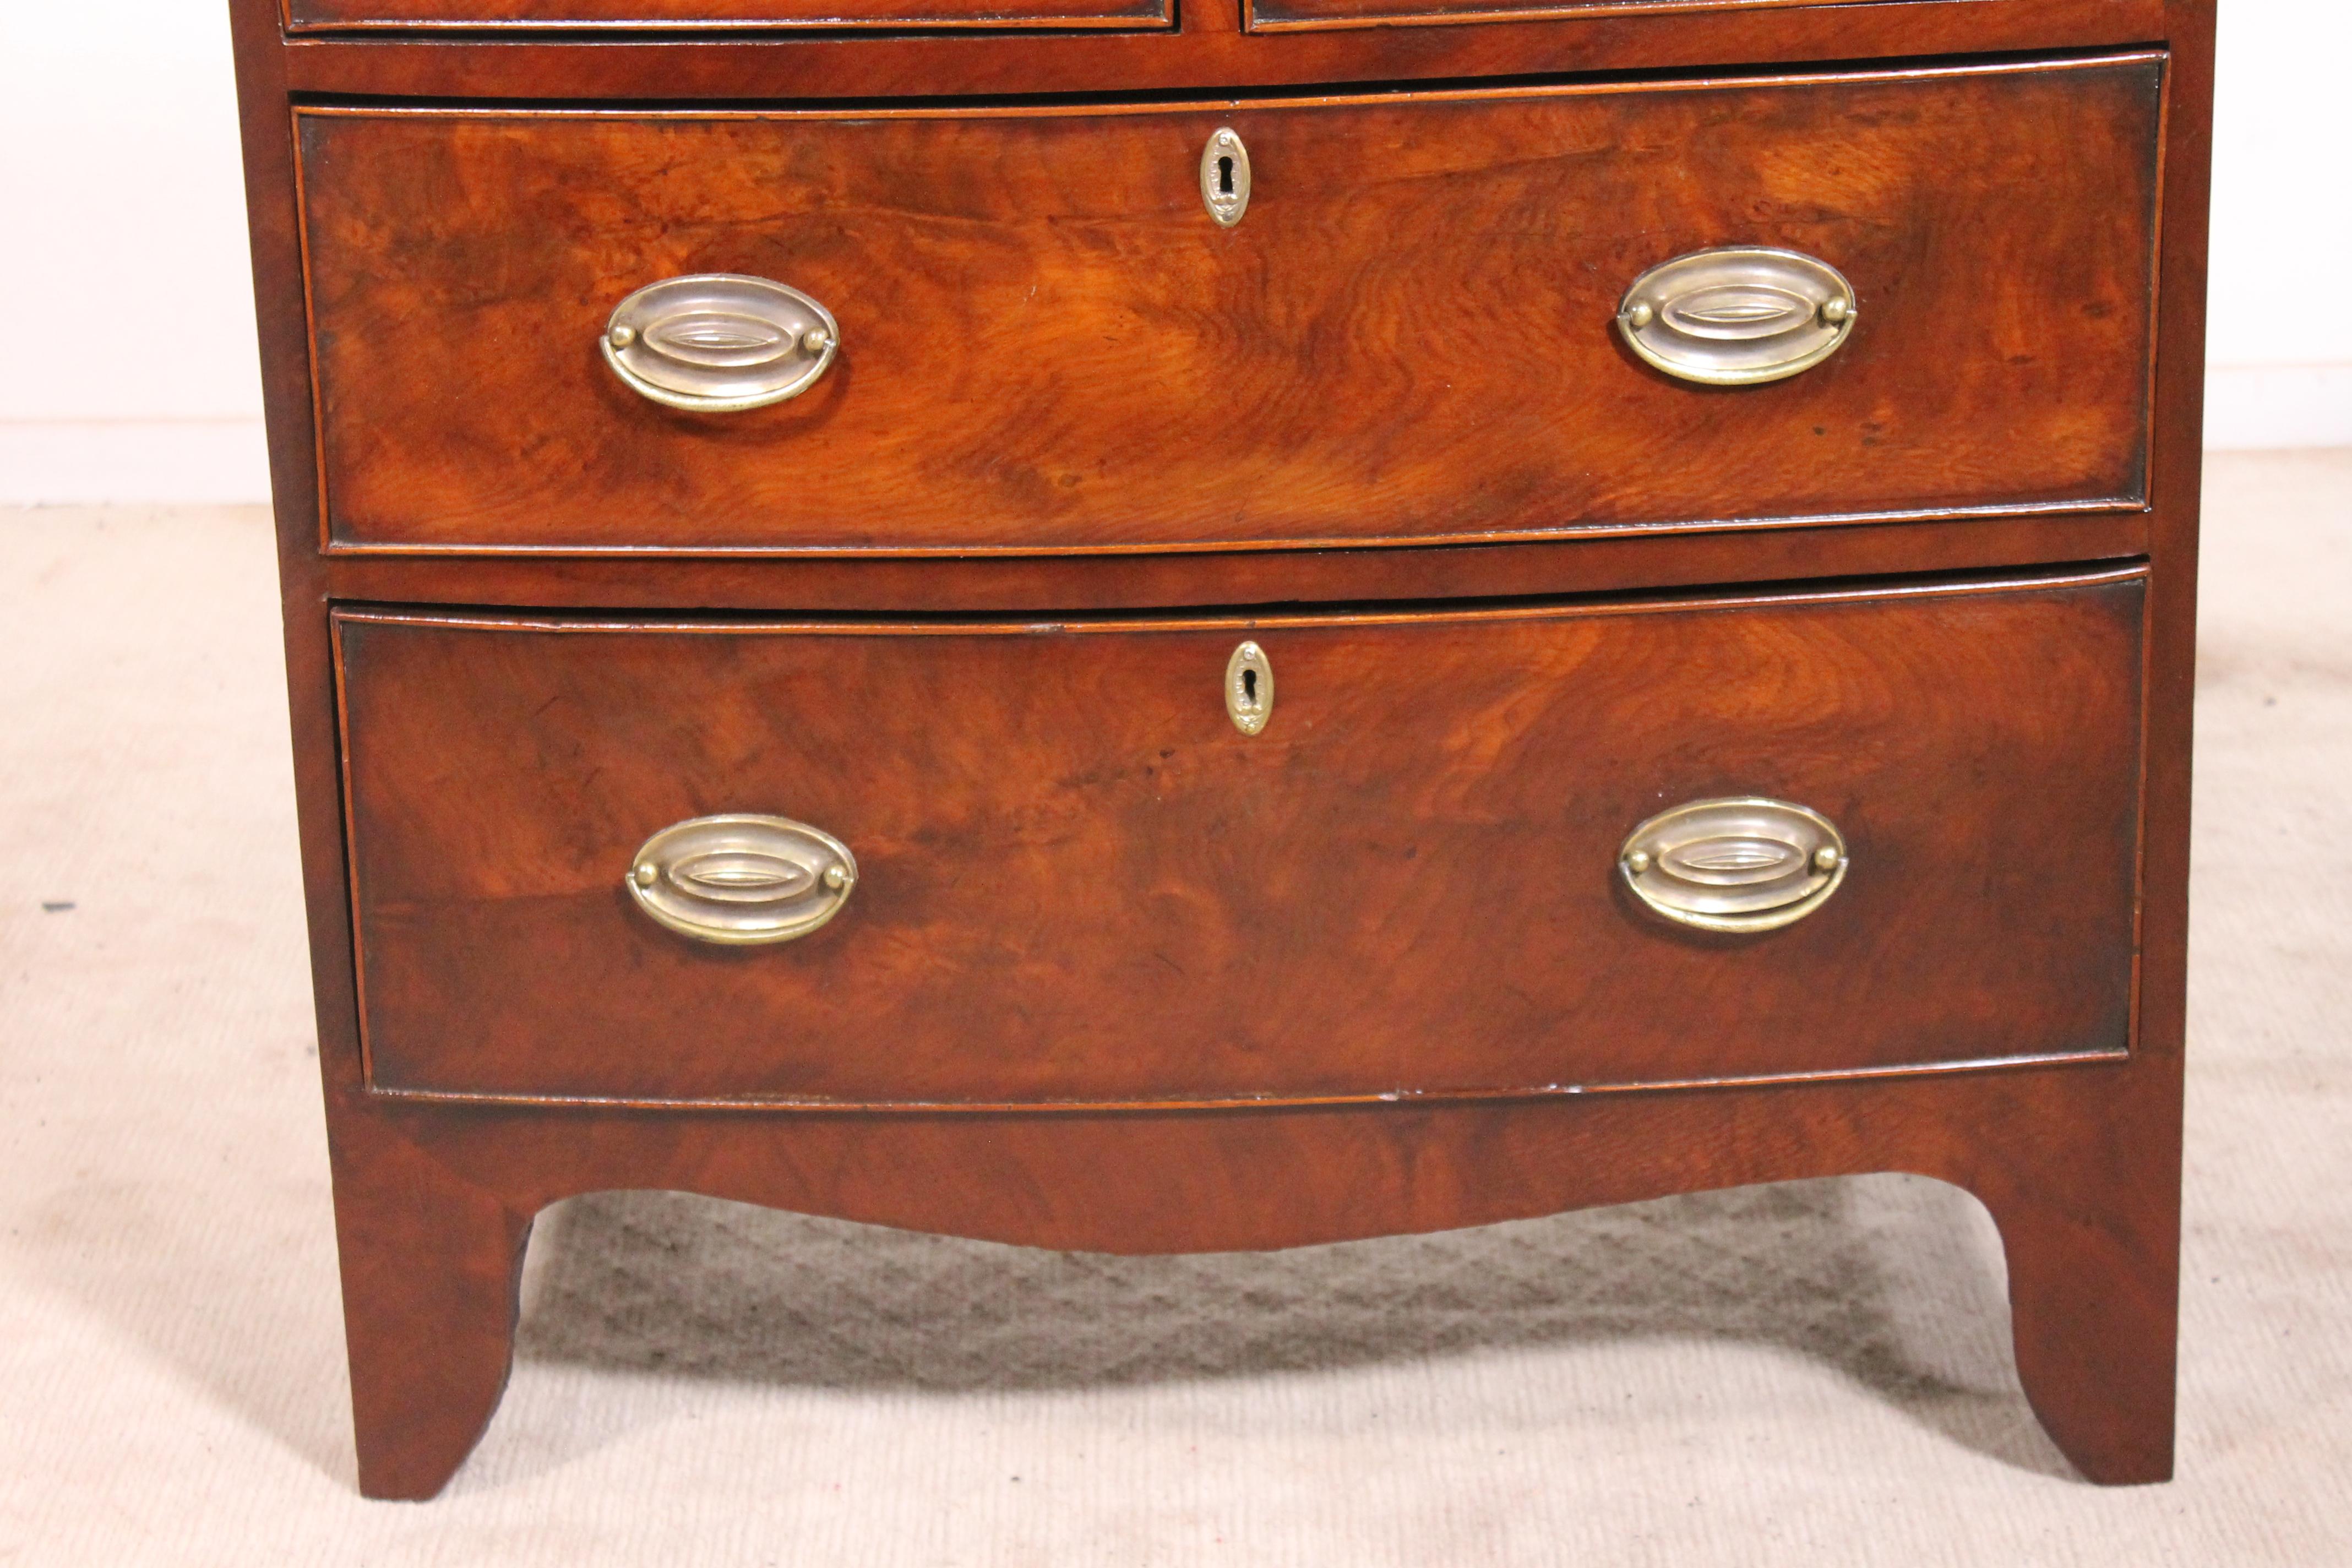 Elegant bowfront chest of drawers from the 19th century in mahogany
A fine English chest of drawers composed of four drawers with these original entrances
The commode stands out by its small size which is quite unusual.
Solid mahogany